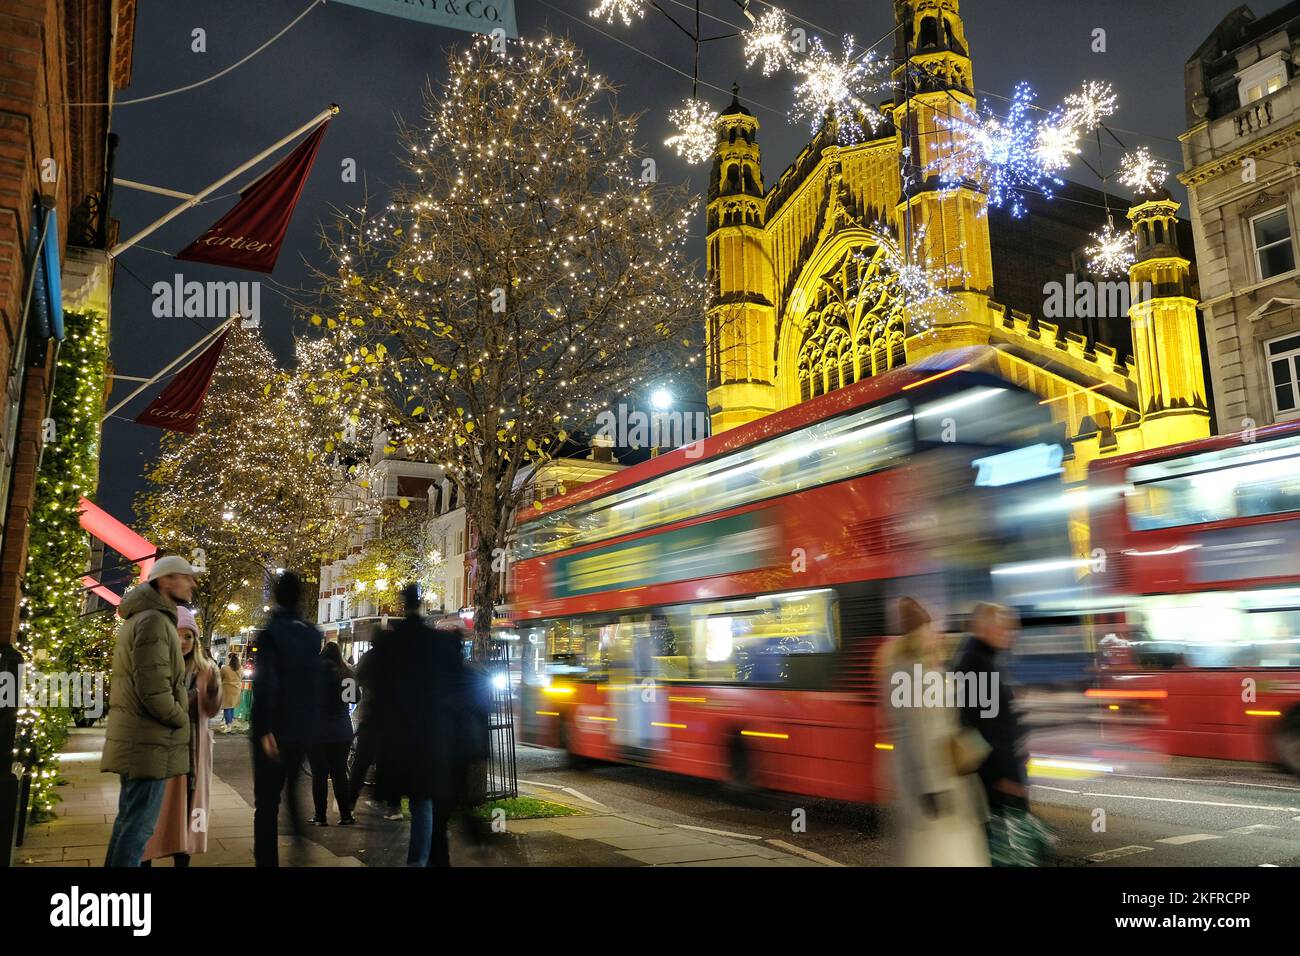 London, UK. 19th November, 2022. Buses pass Sloane Street with Christmas lights glittering behind. The Christmas light switch-on in King's Road attracted huge numbers of visitors to the surrounding area as people enter into the festive spirit. Credit: Eleventh Hour Photography/Alamy Live News Stock Photo